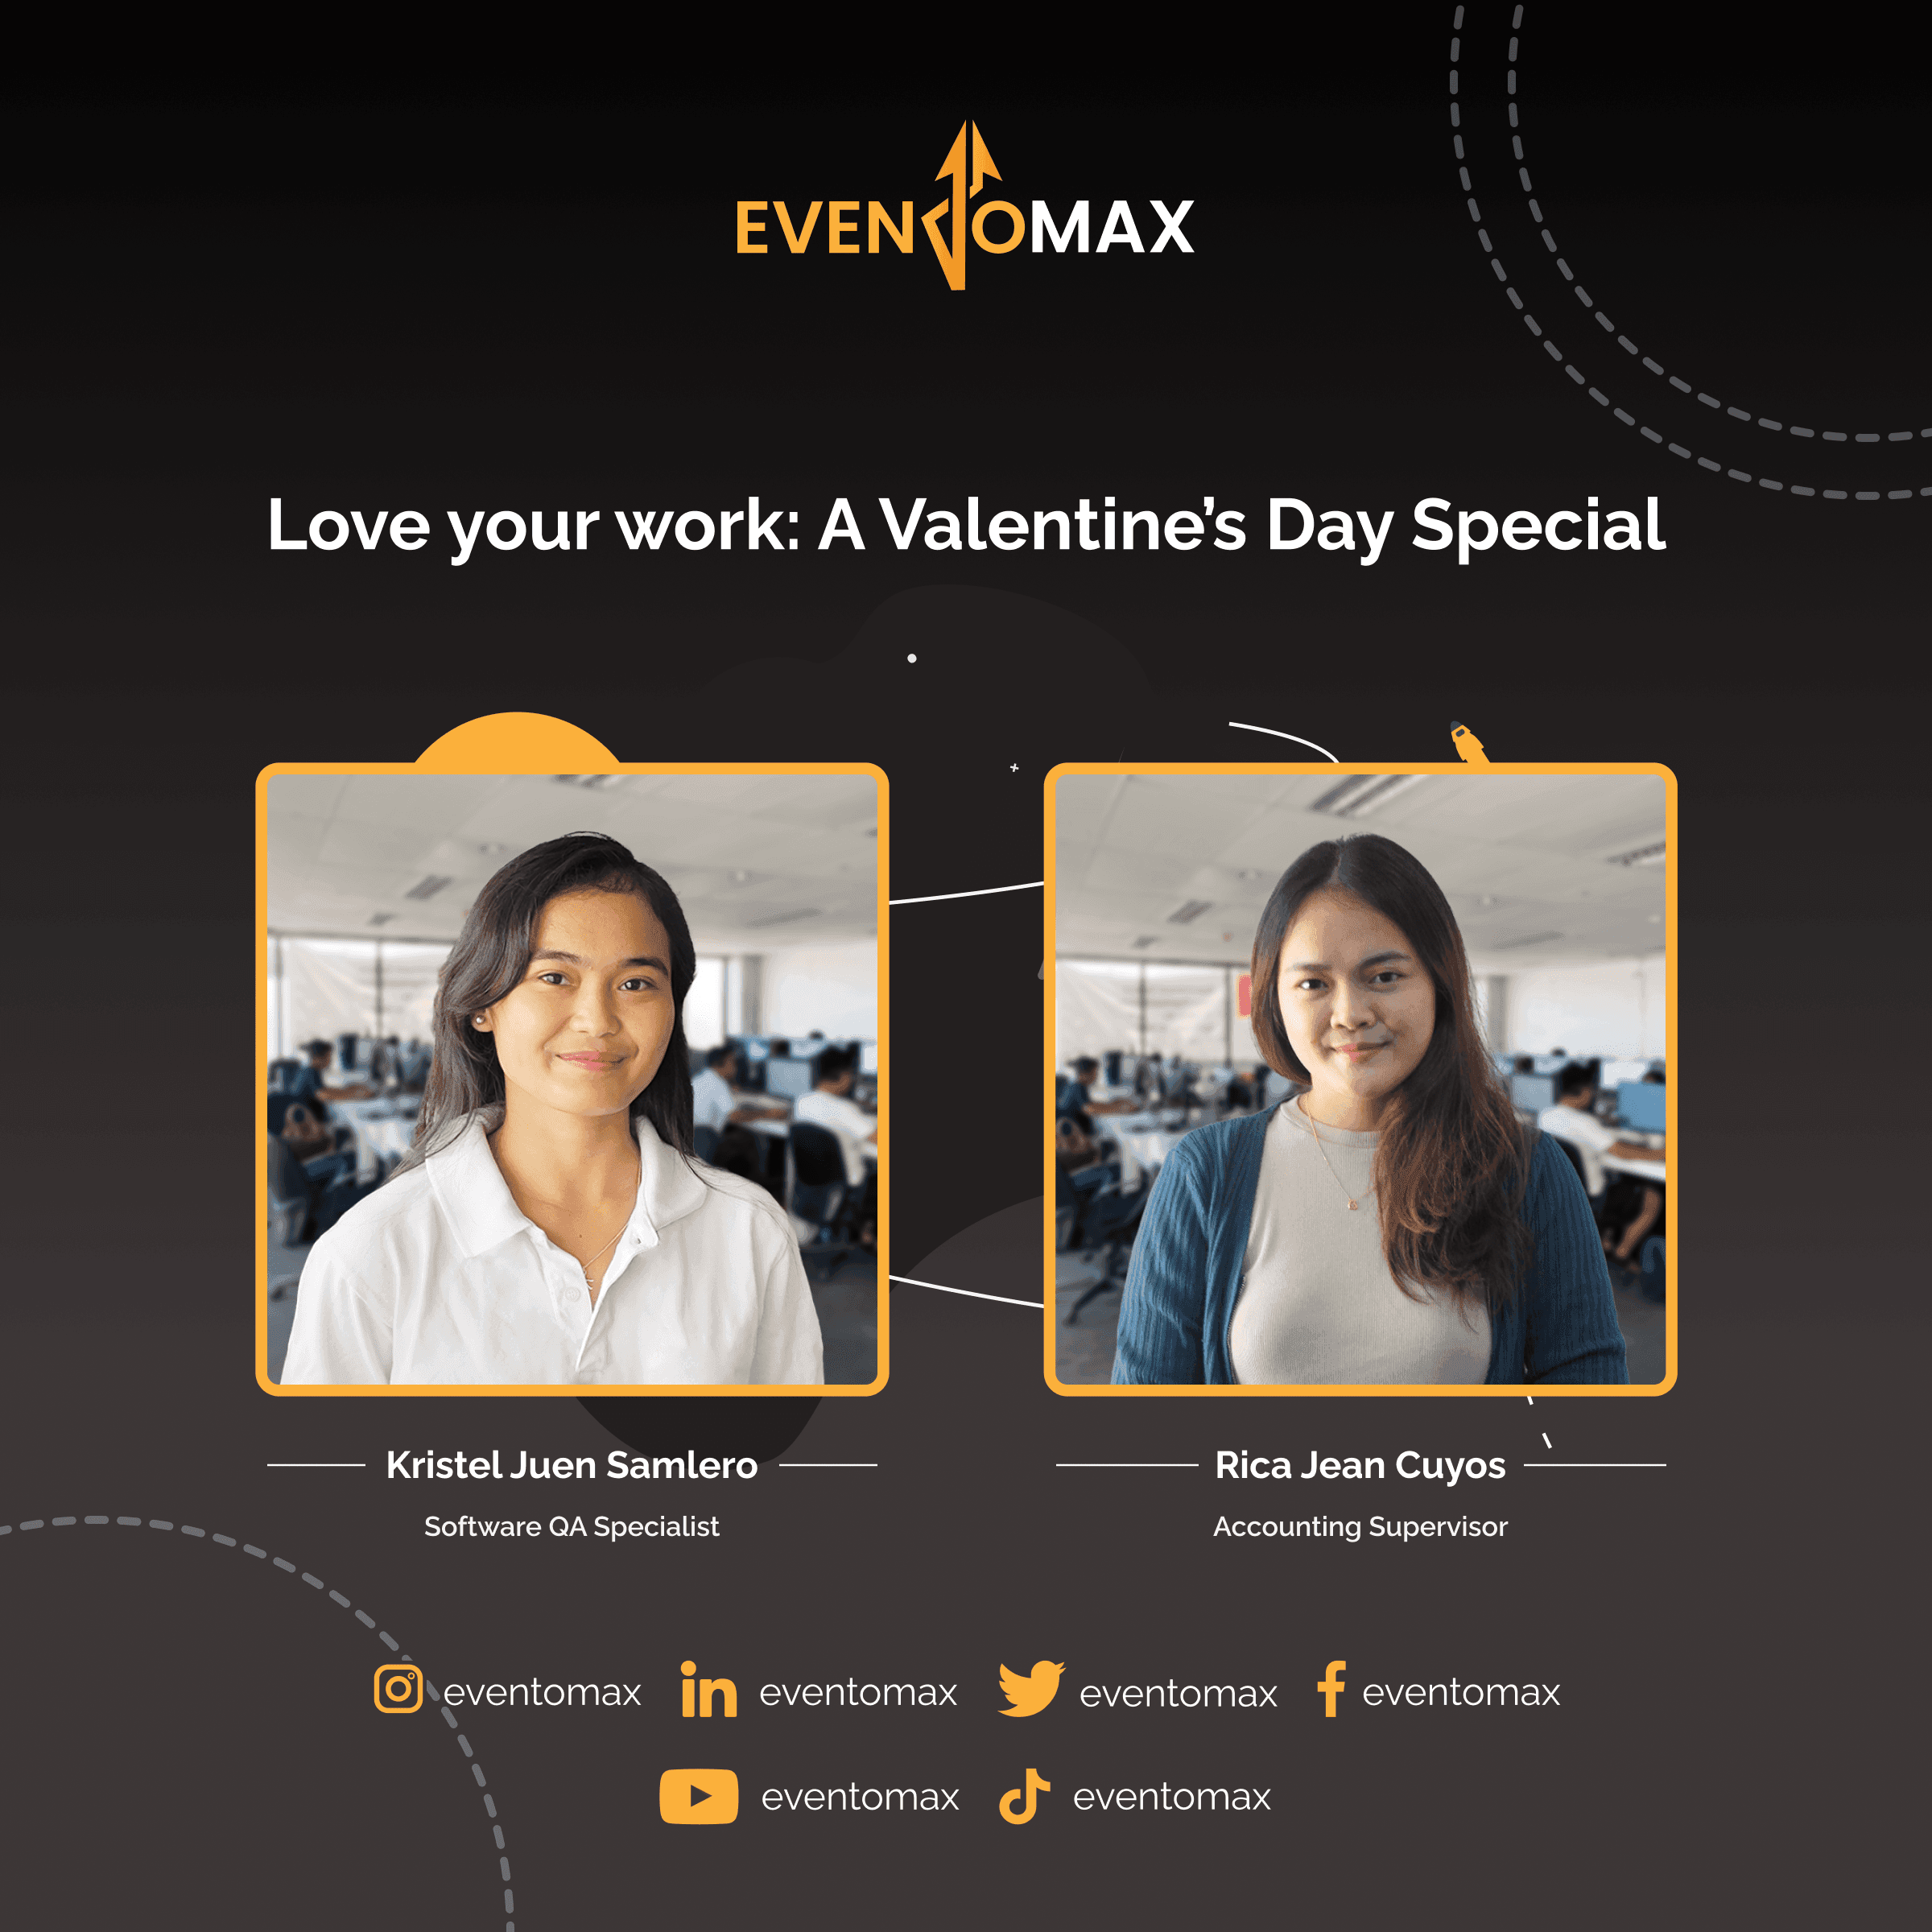 Love your work: A Valentine's Day Special